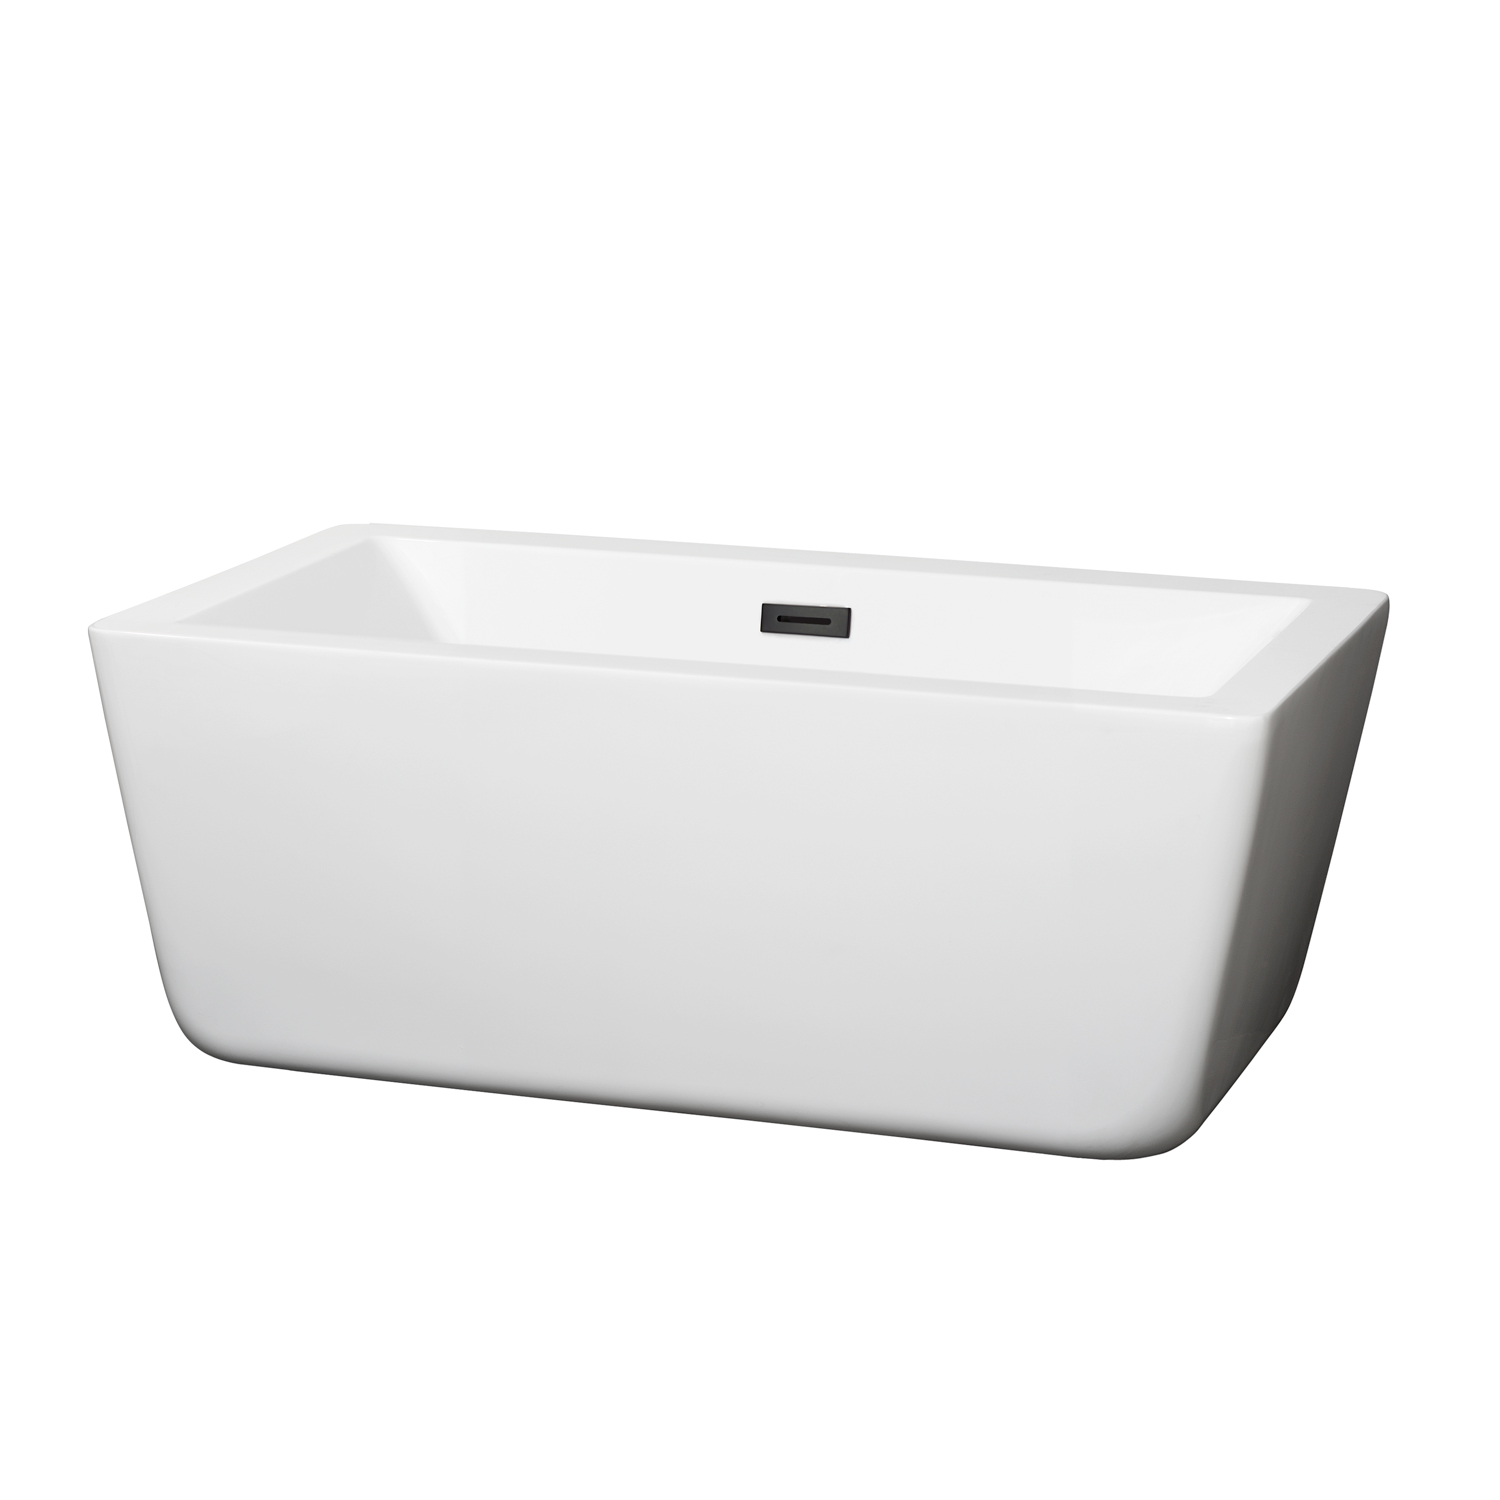 59" Freestanding Bathtub in White with Matte Black Drain and Overflow Trim